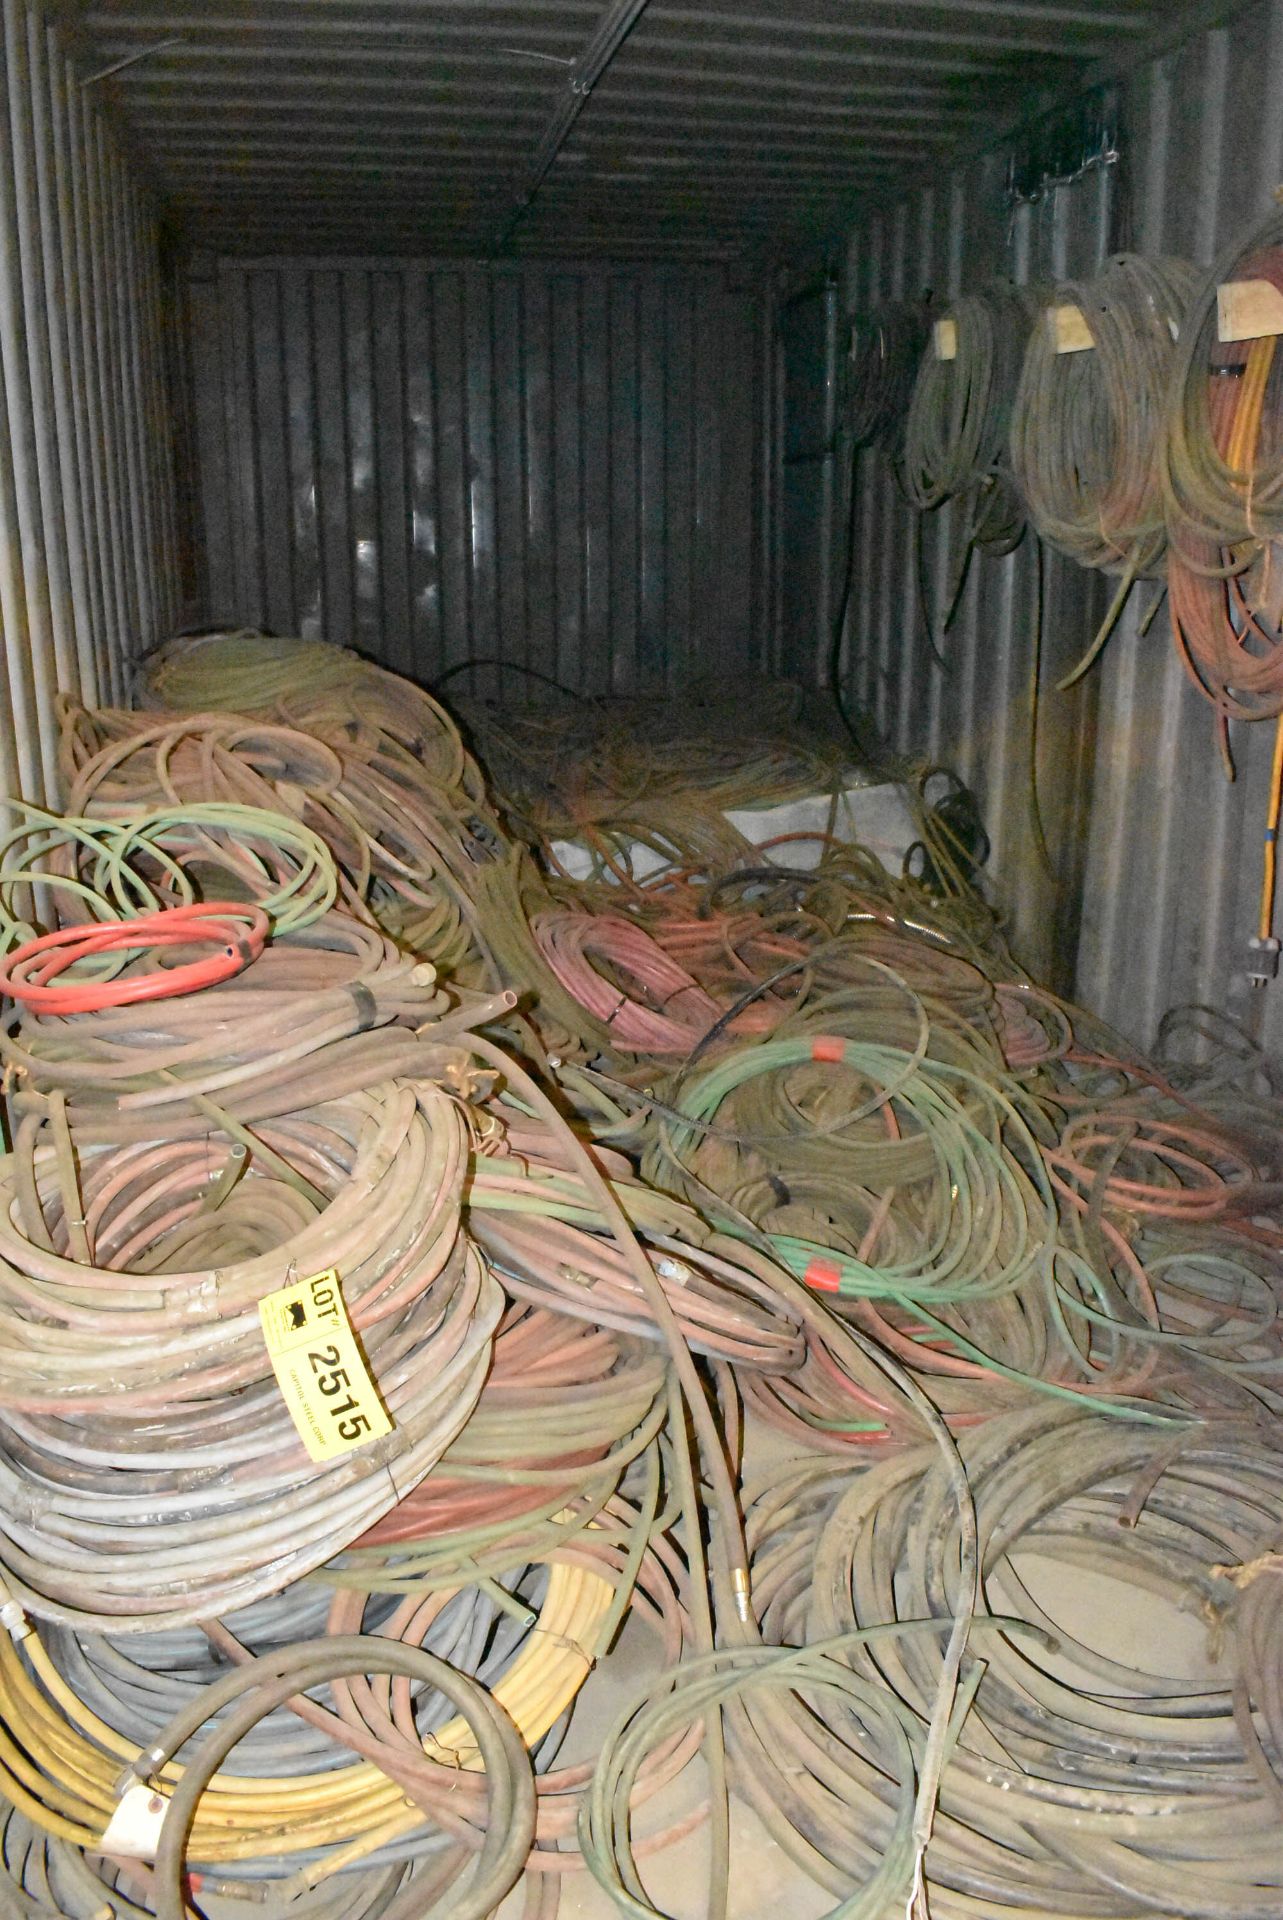 LOT/ CONTENTS OF CONTAINER - PNEUMATIC HOSE, HYDRAULIC HOSE, WELDING CABLES, OXY-ACETYLENE HOSE